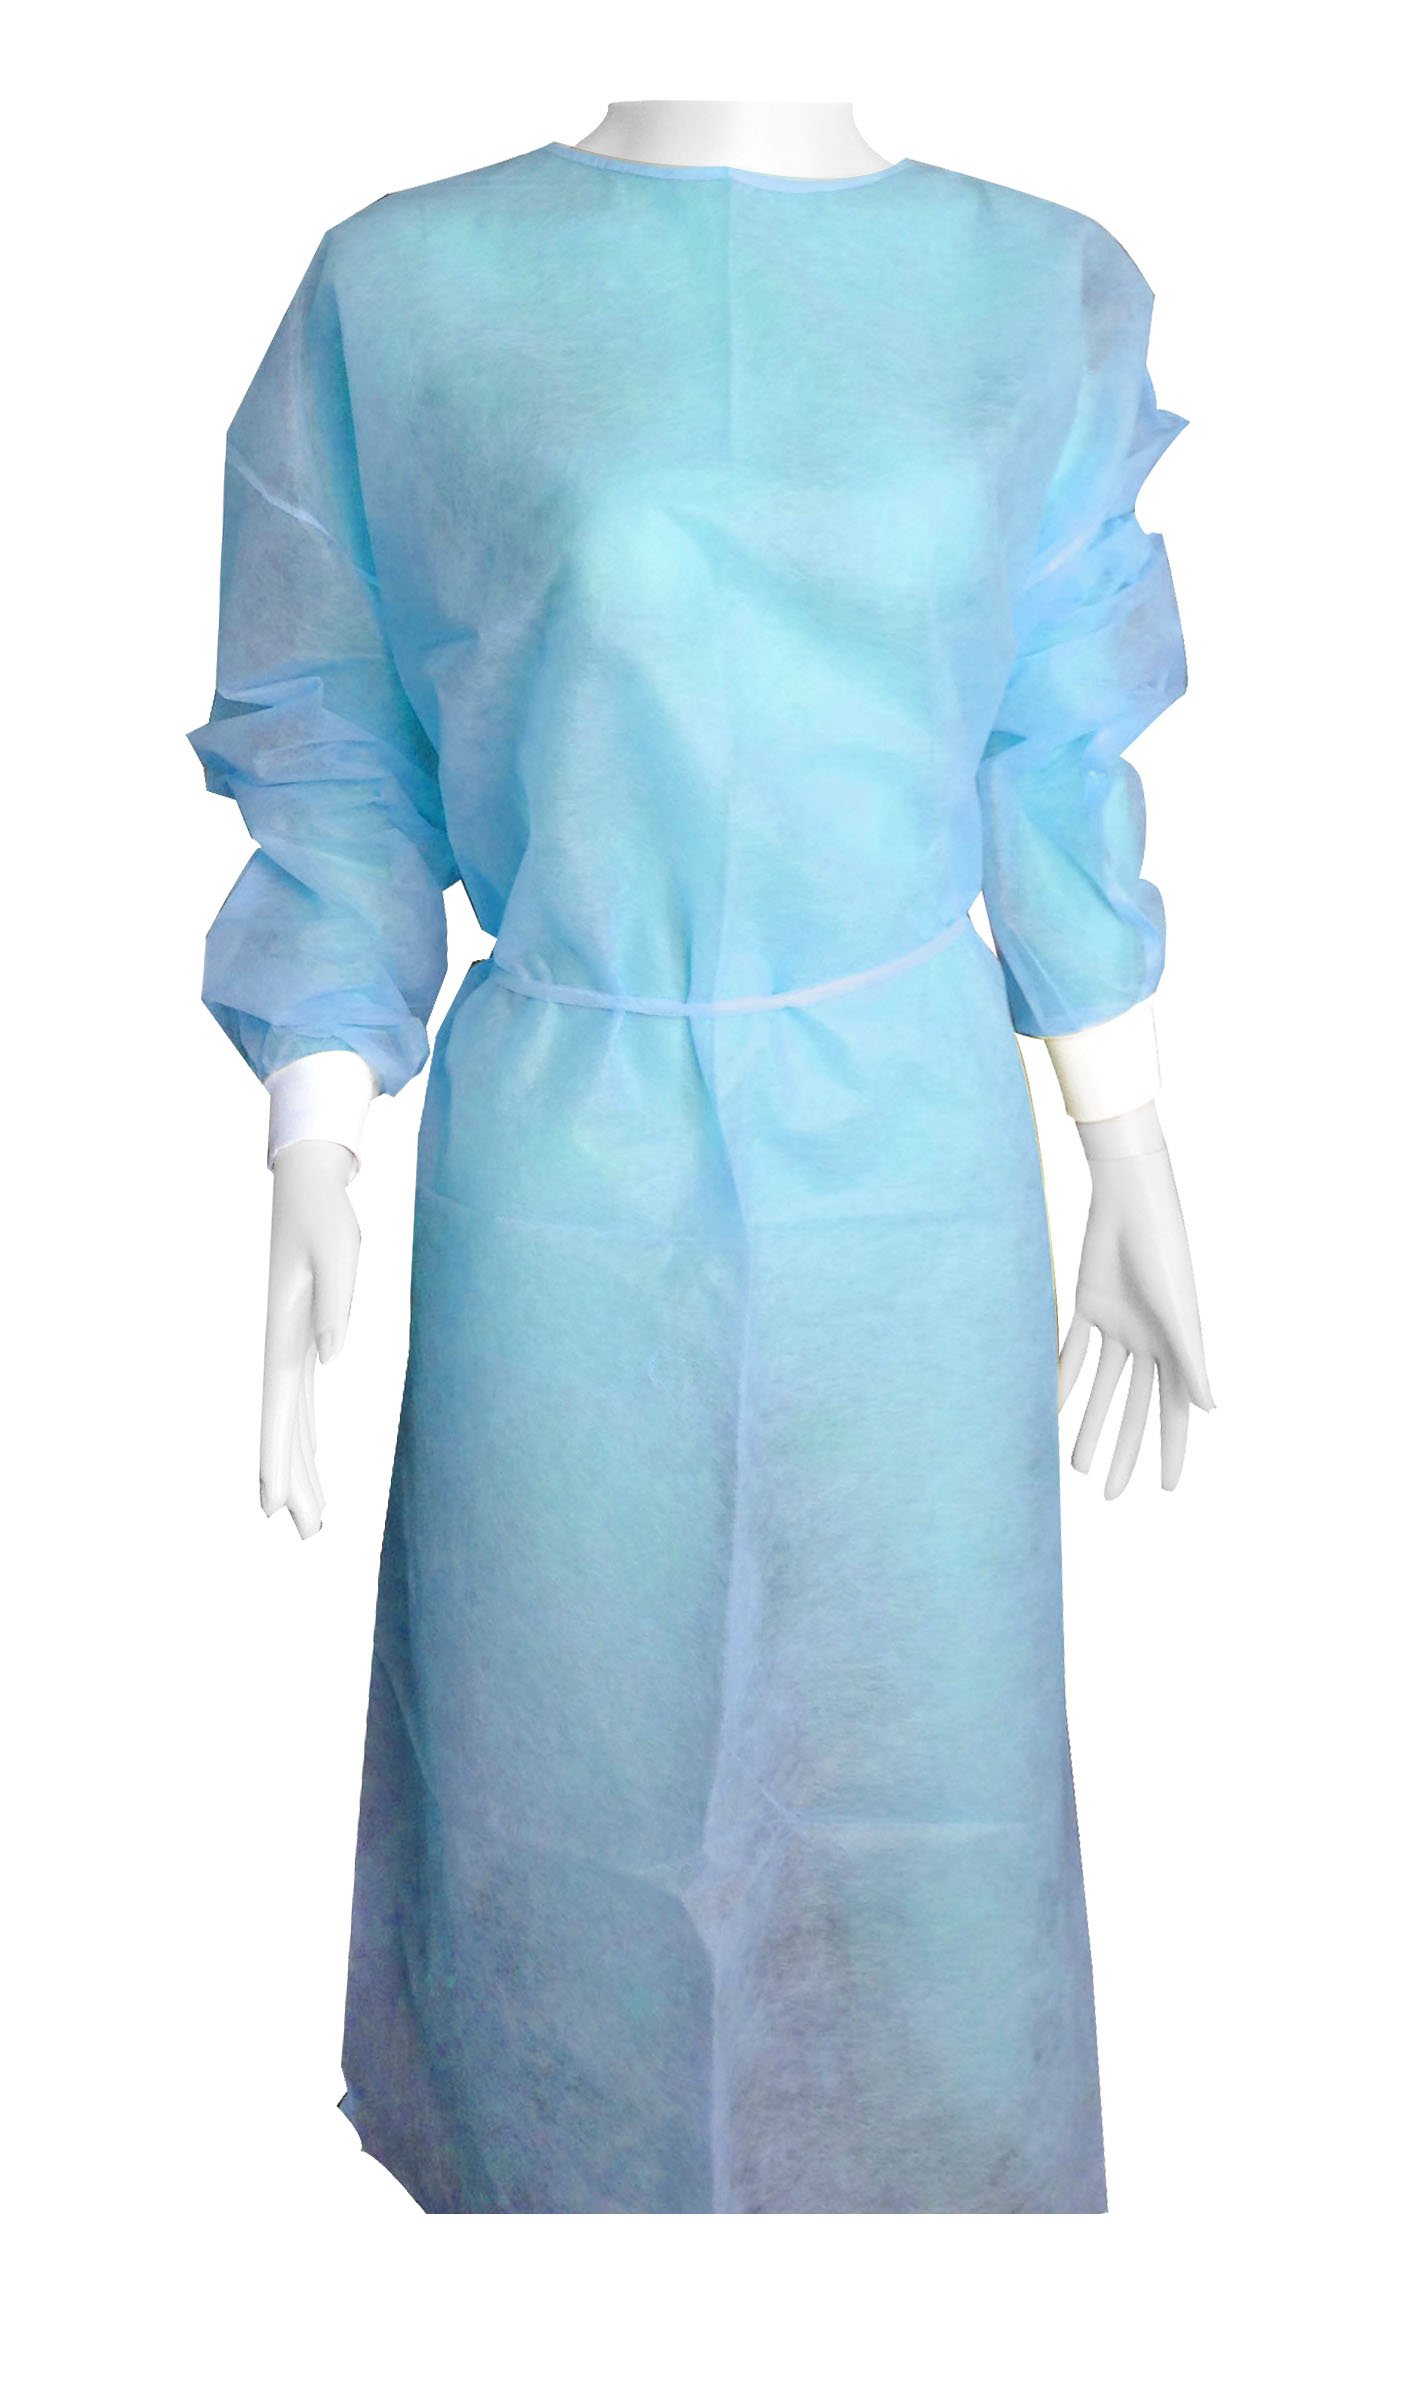 Everyday Essentials Isolation Gowns Universal Blue (5 x 10)